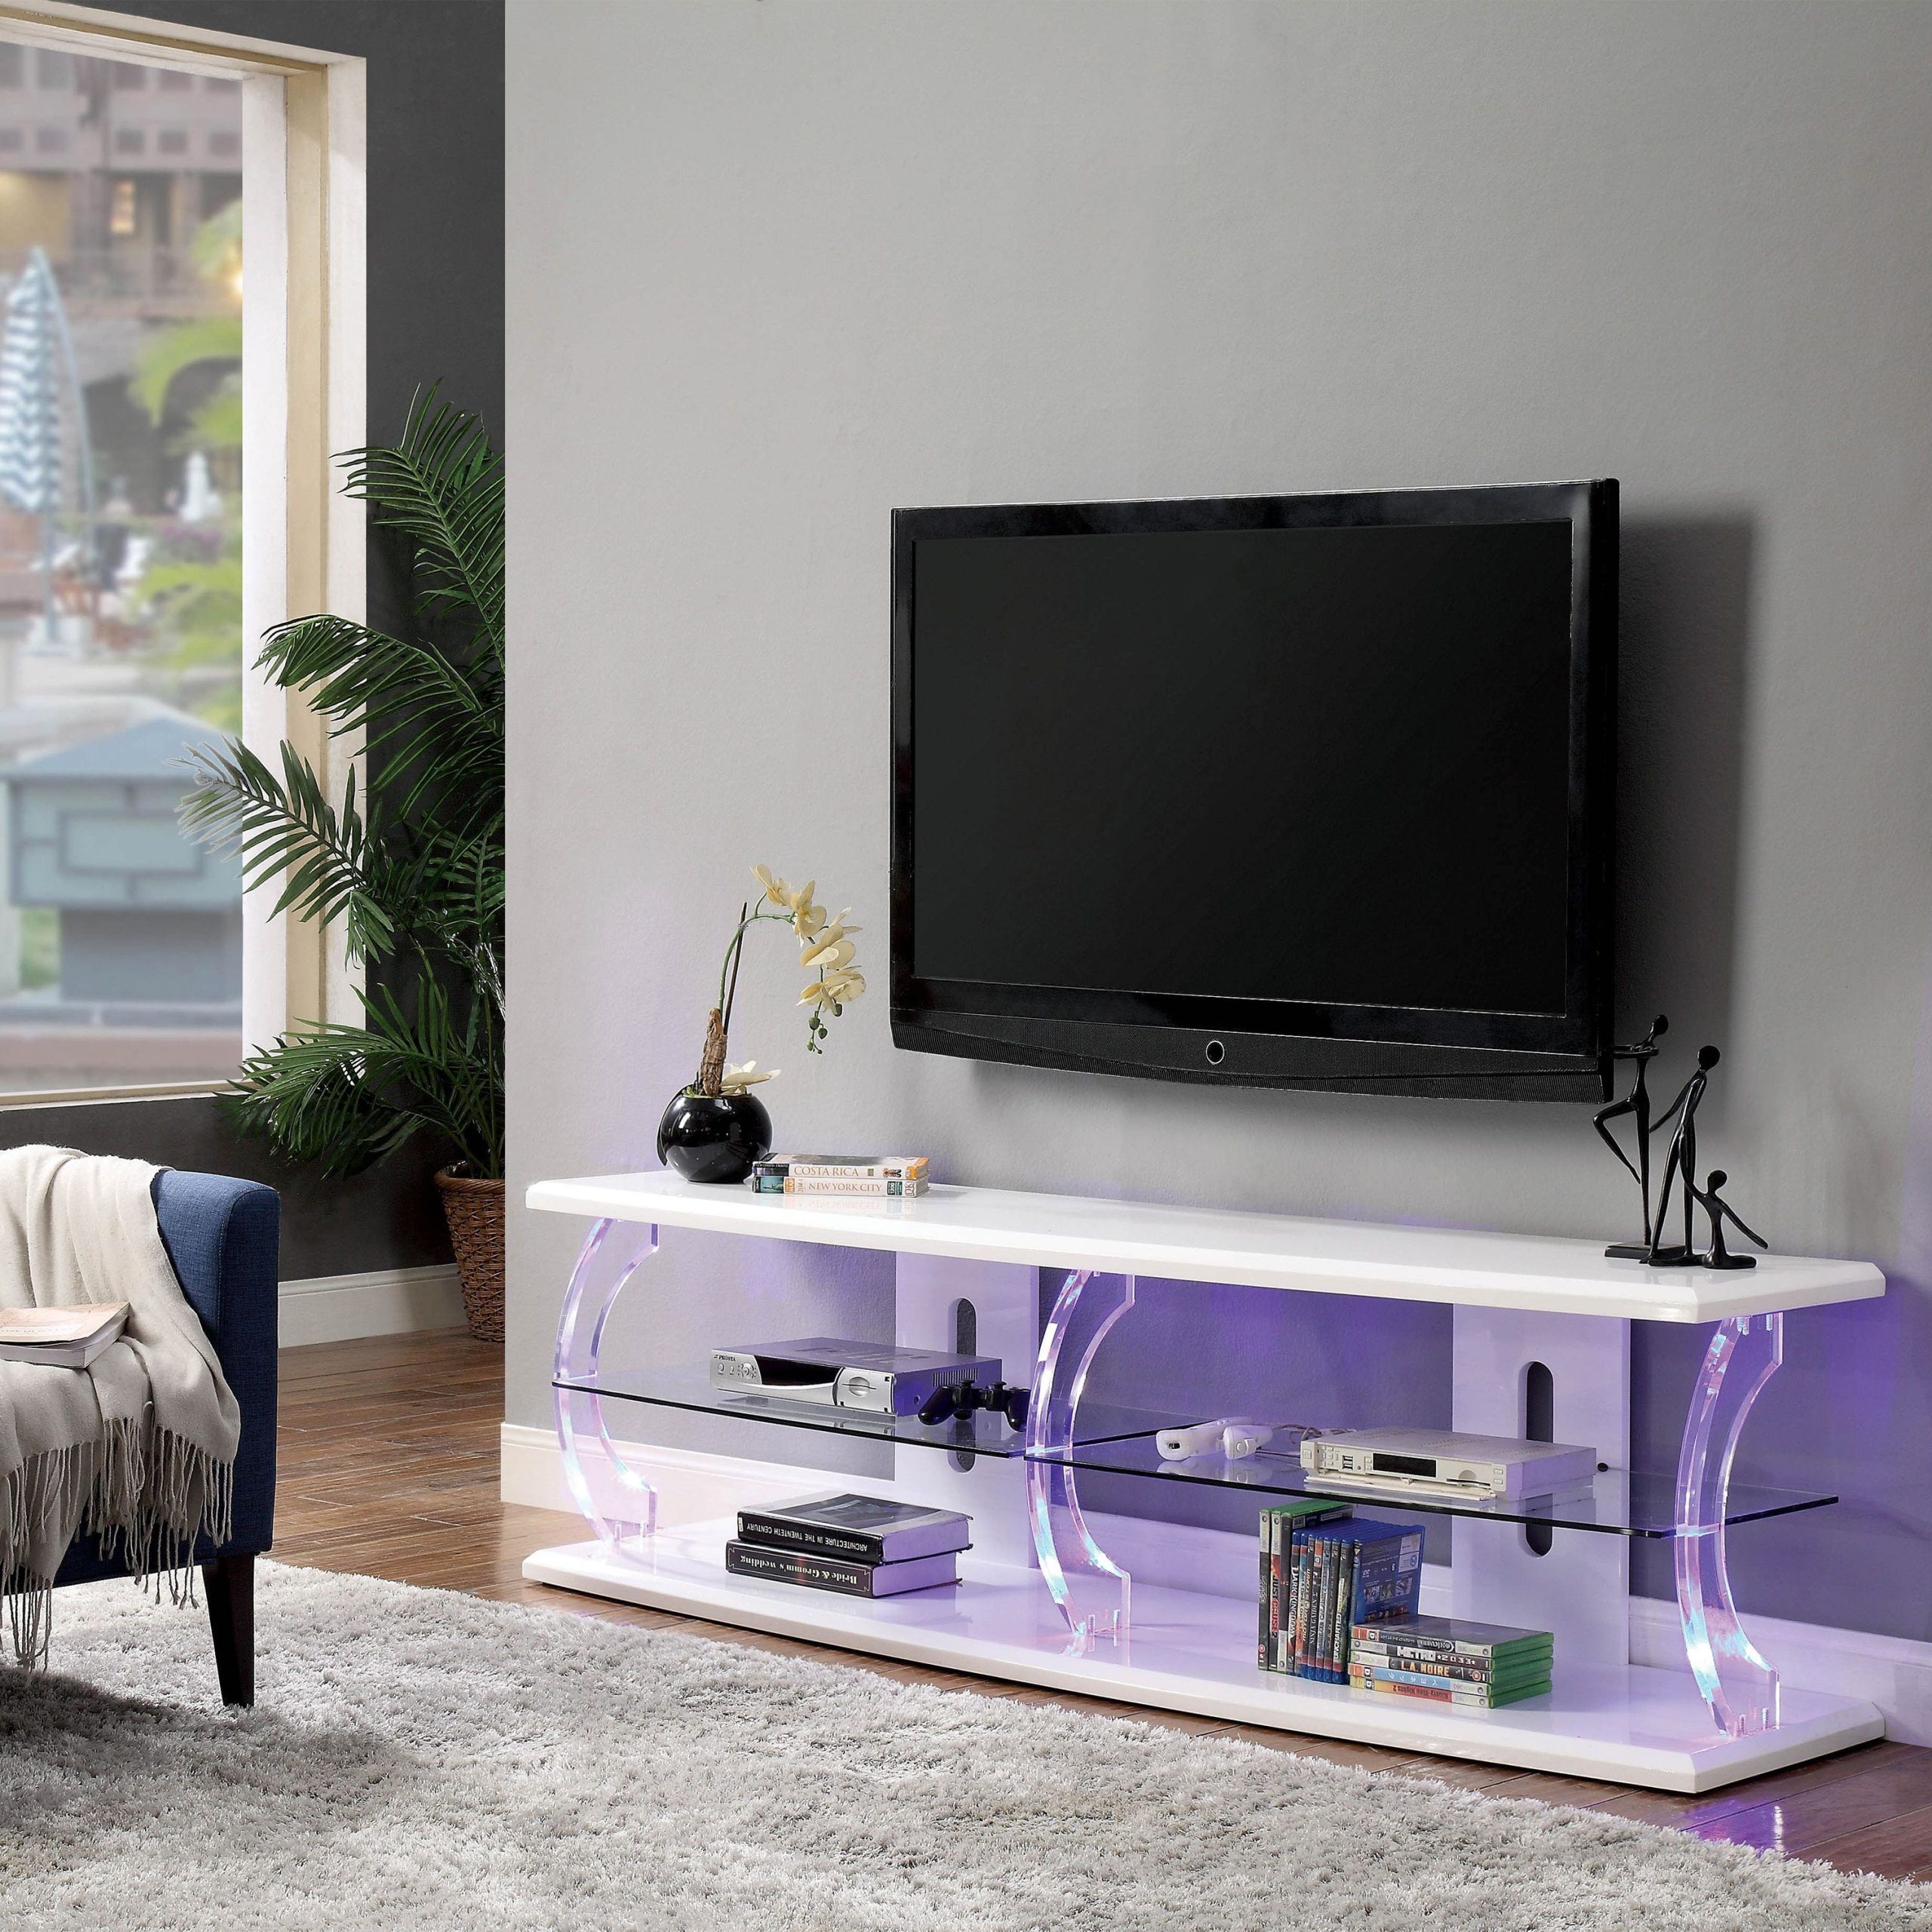 Furniture Of America Vedot Contemporary Led Tv Stand, 72", White And Regarding Led Tv Stands With Outlet (Gallery 2 of 20)